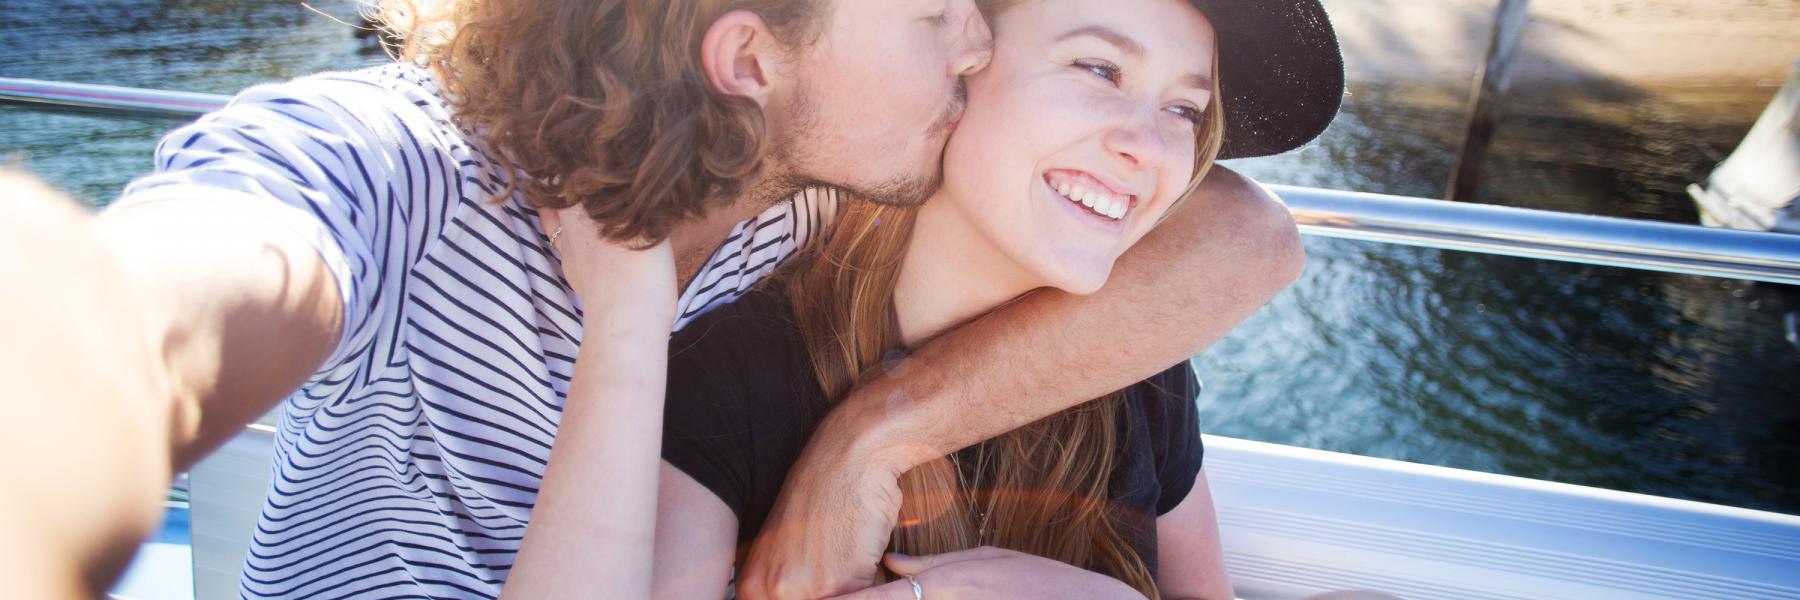 Young man kissing smiling woman on the cheek whilst taking a photo